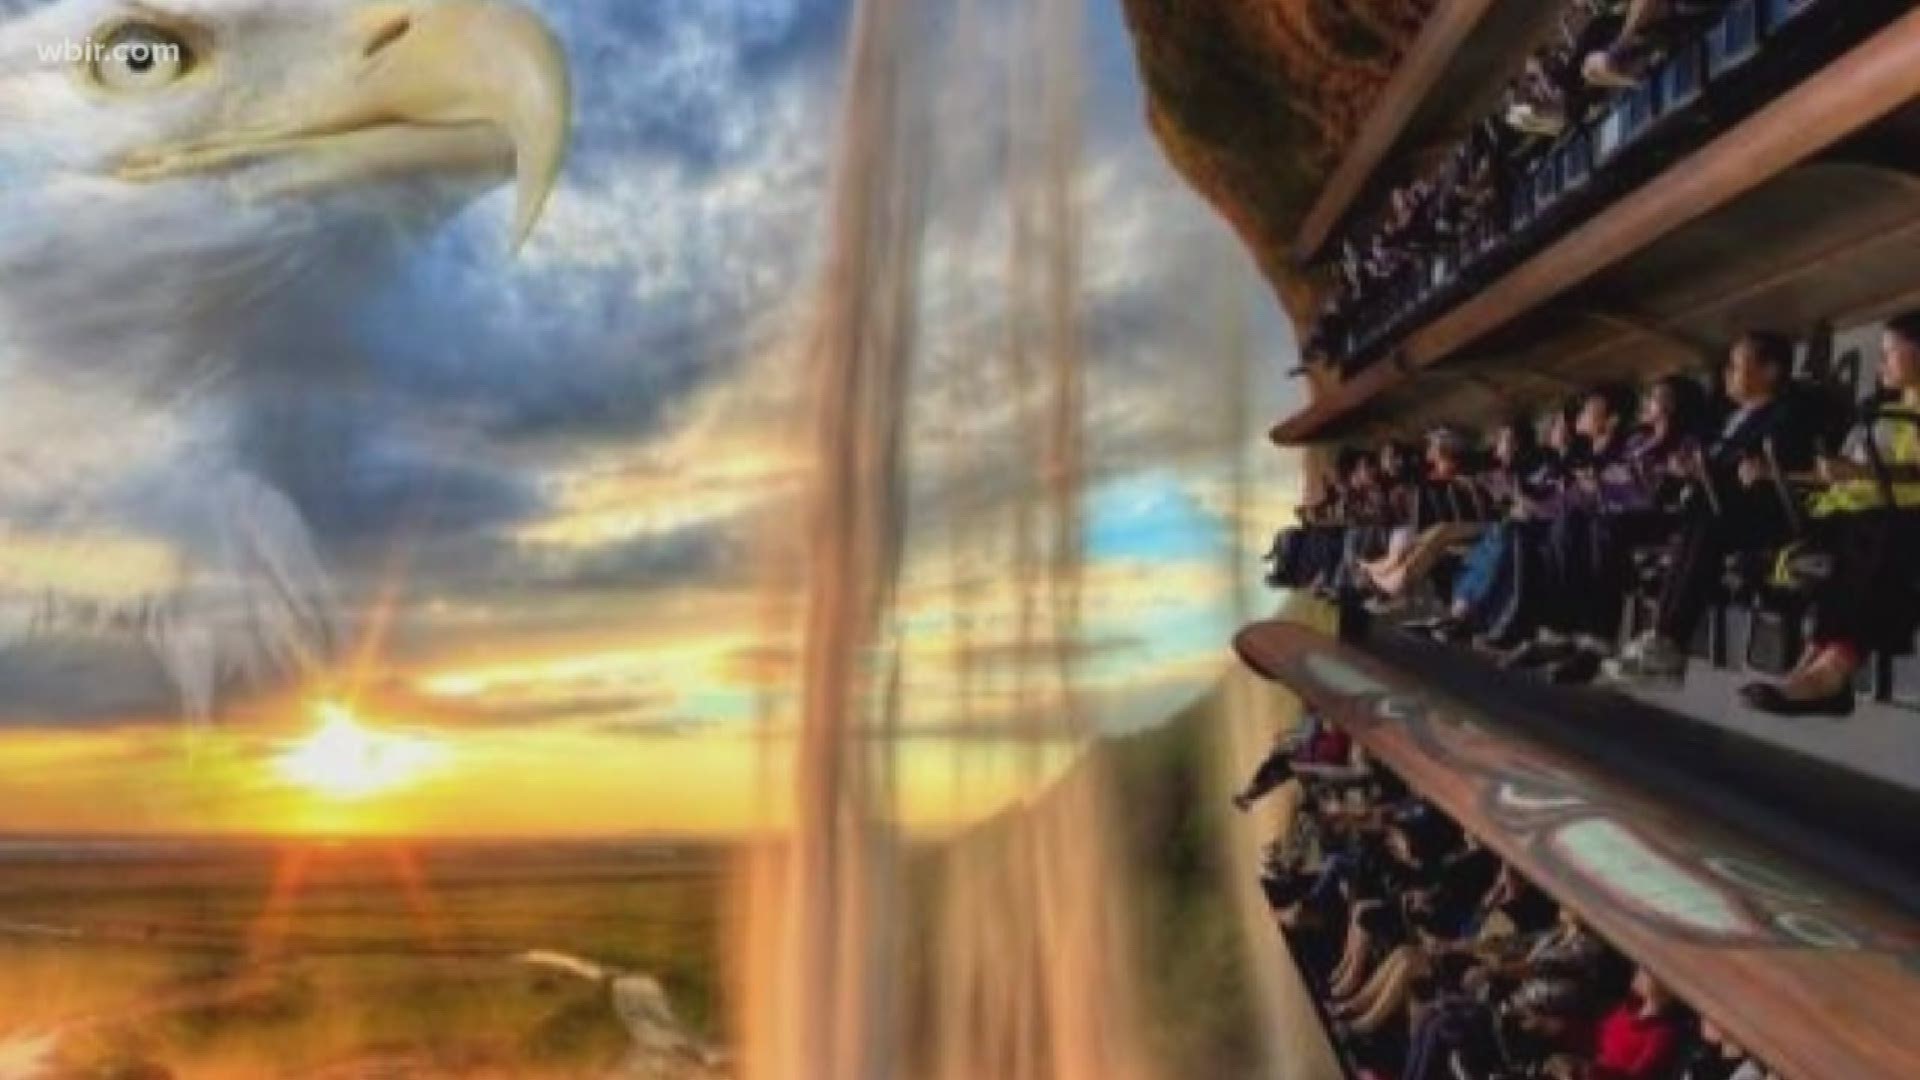 The Island in Pigeon Forge announced a new flying theater that will take riders soaring over some of the country's iconic landmarks and landscapes is coming soon.